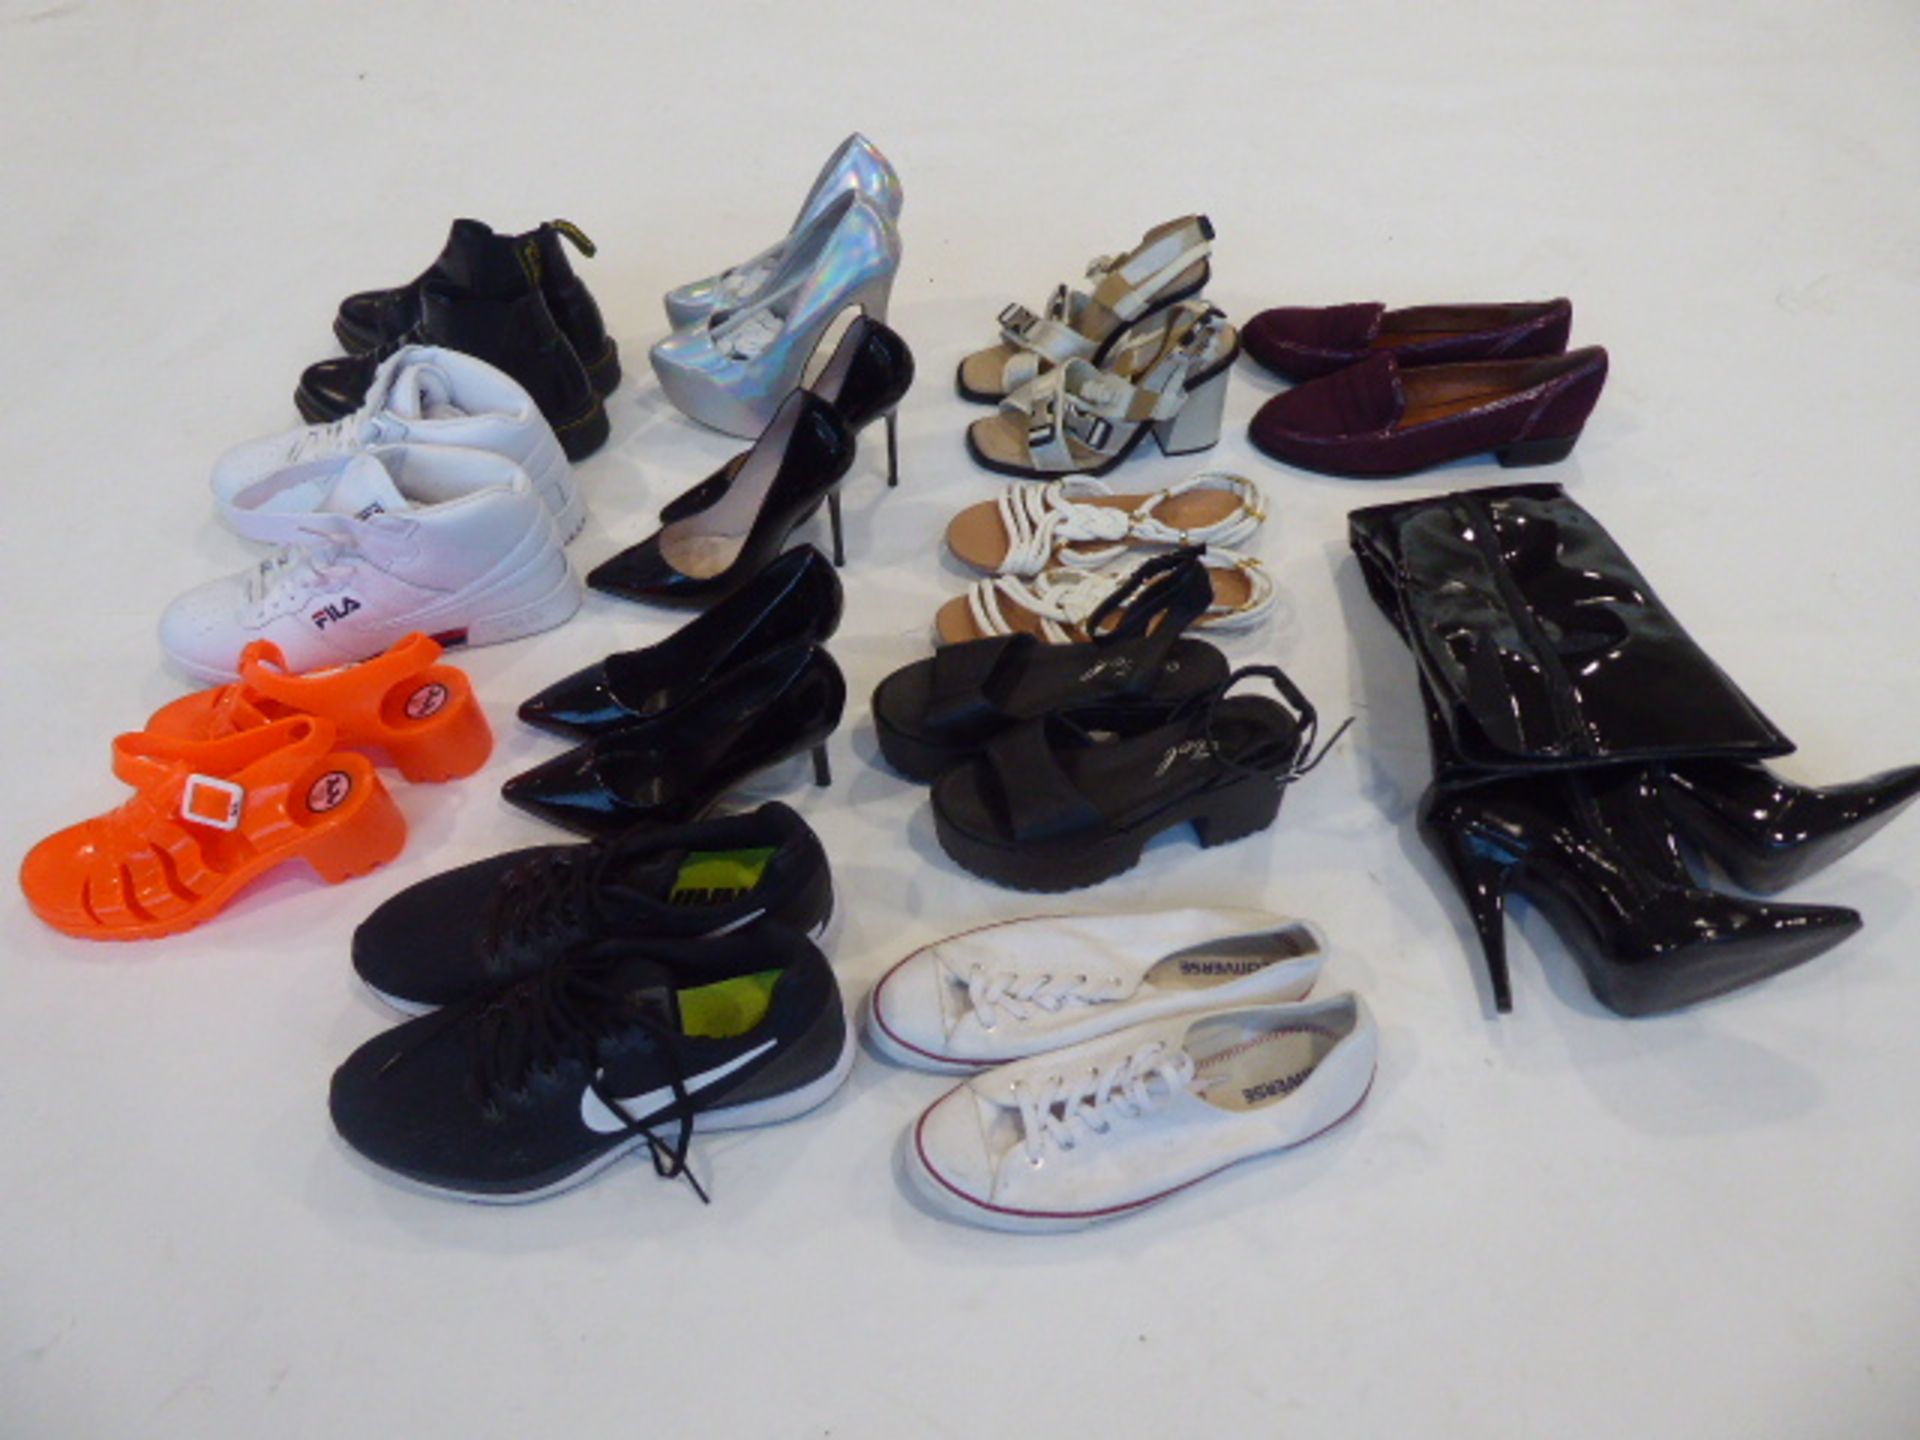 Large bag containing lady's and gent's used shoes, boots and trainers in various sizes